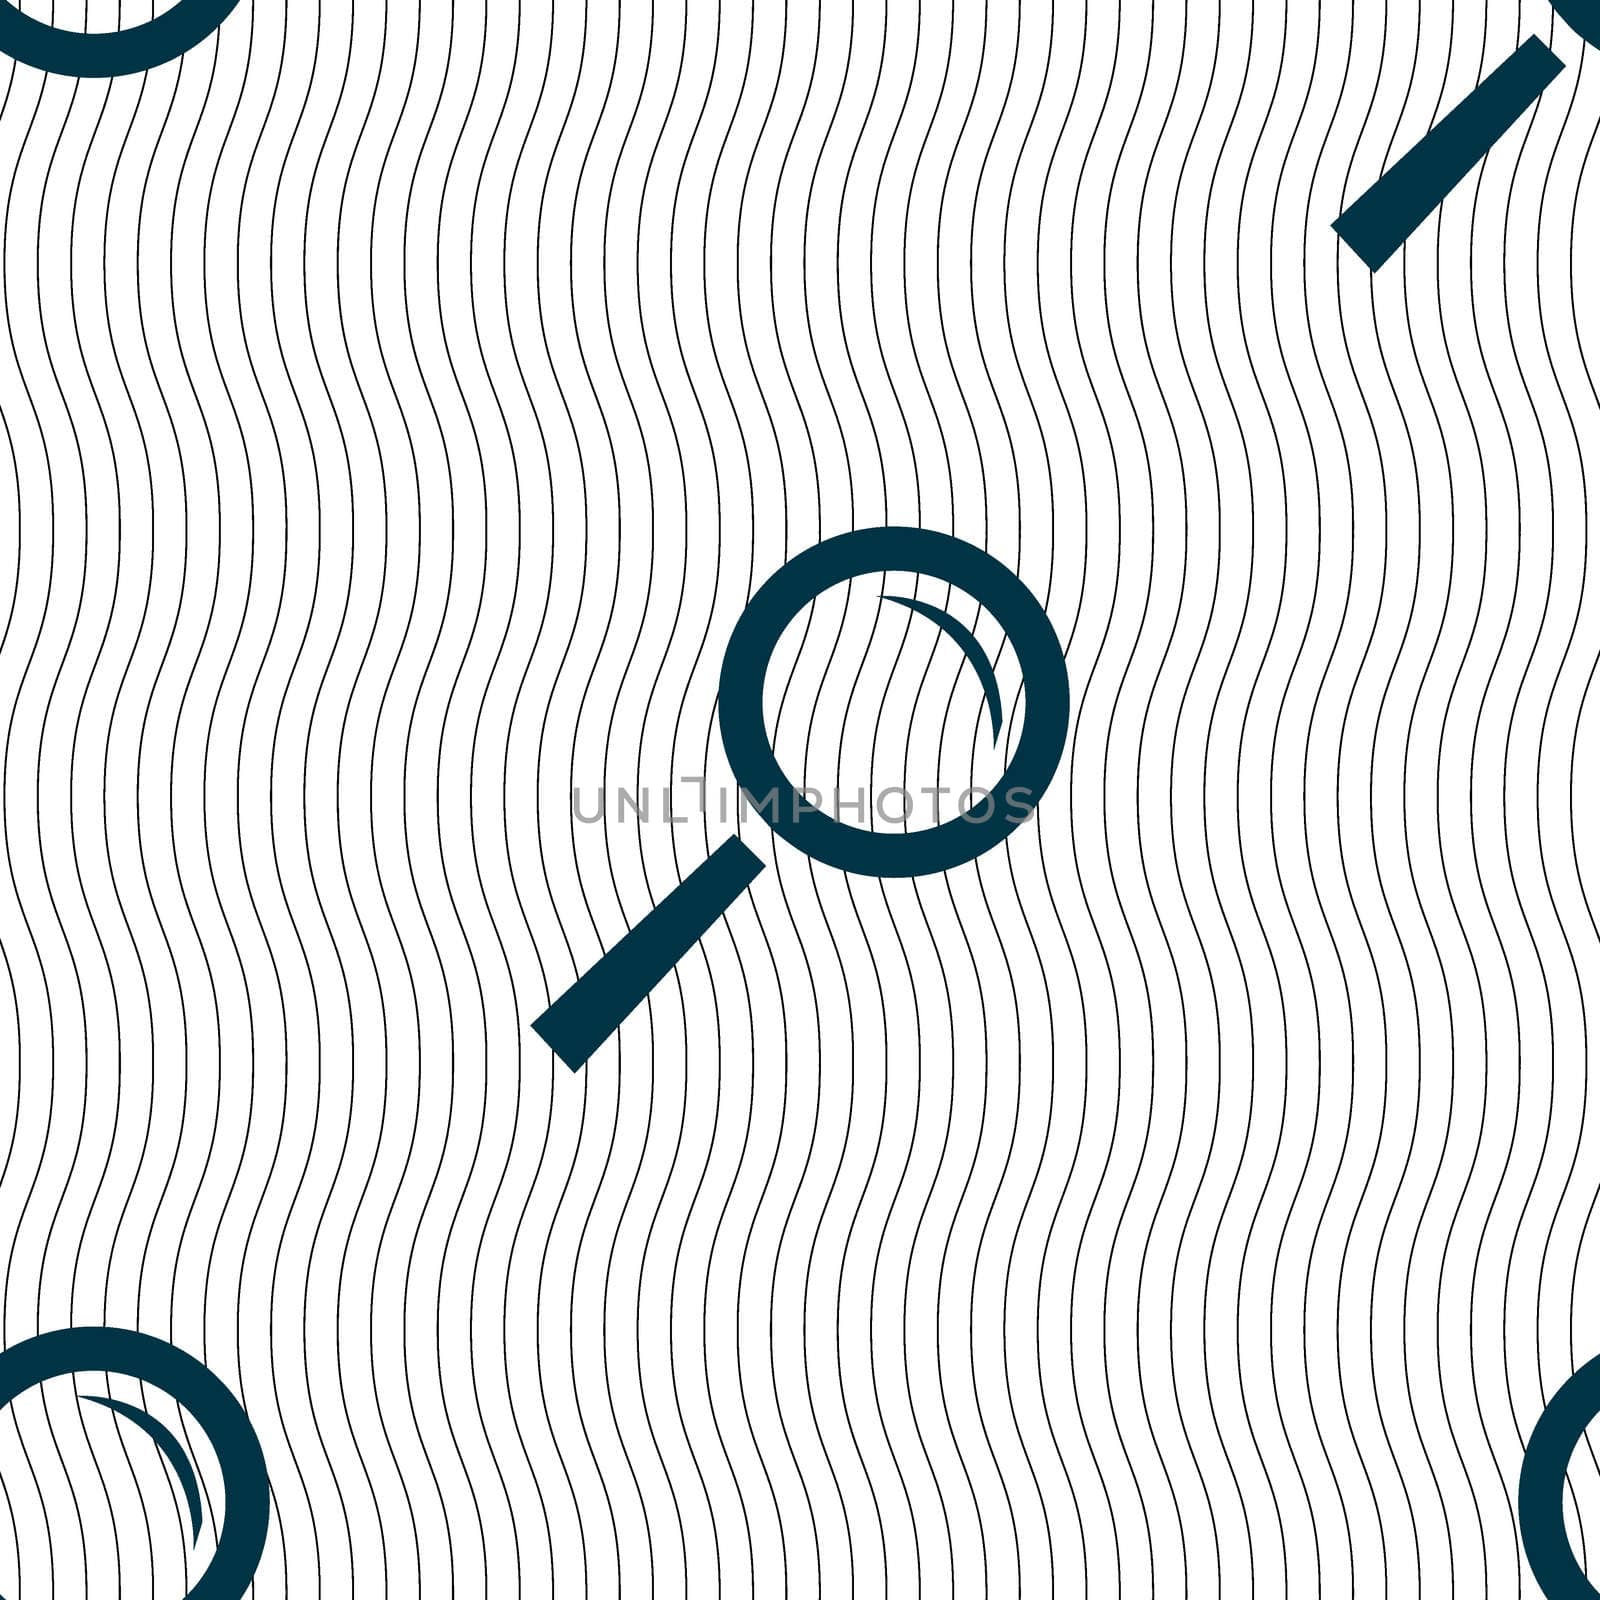 Magnifier glass sign icon. Zoom tool button. Navigation search symbol. Seamless pattern with geometric texture. illustration